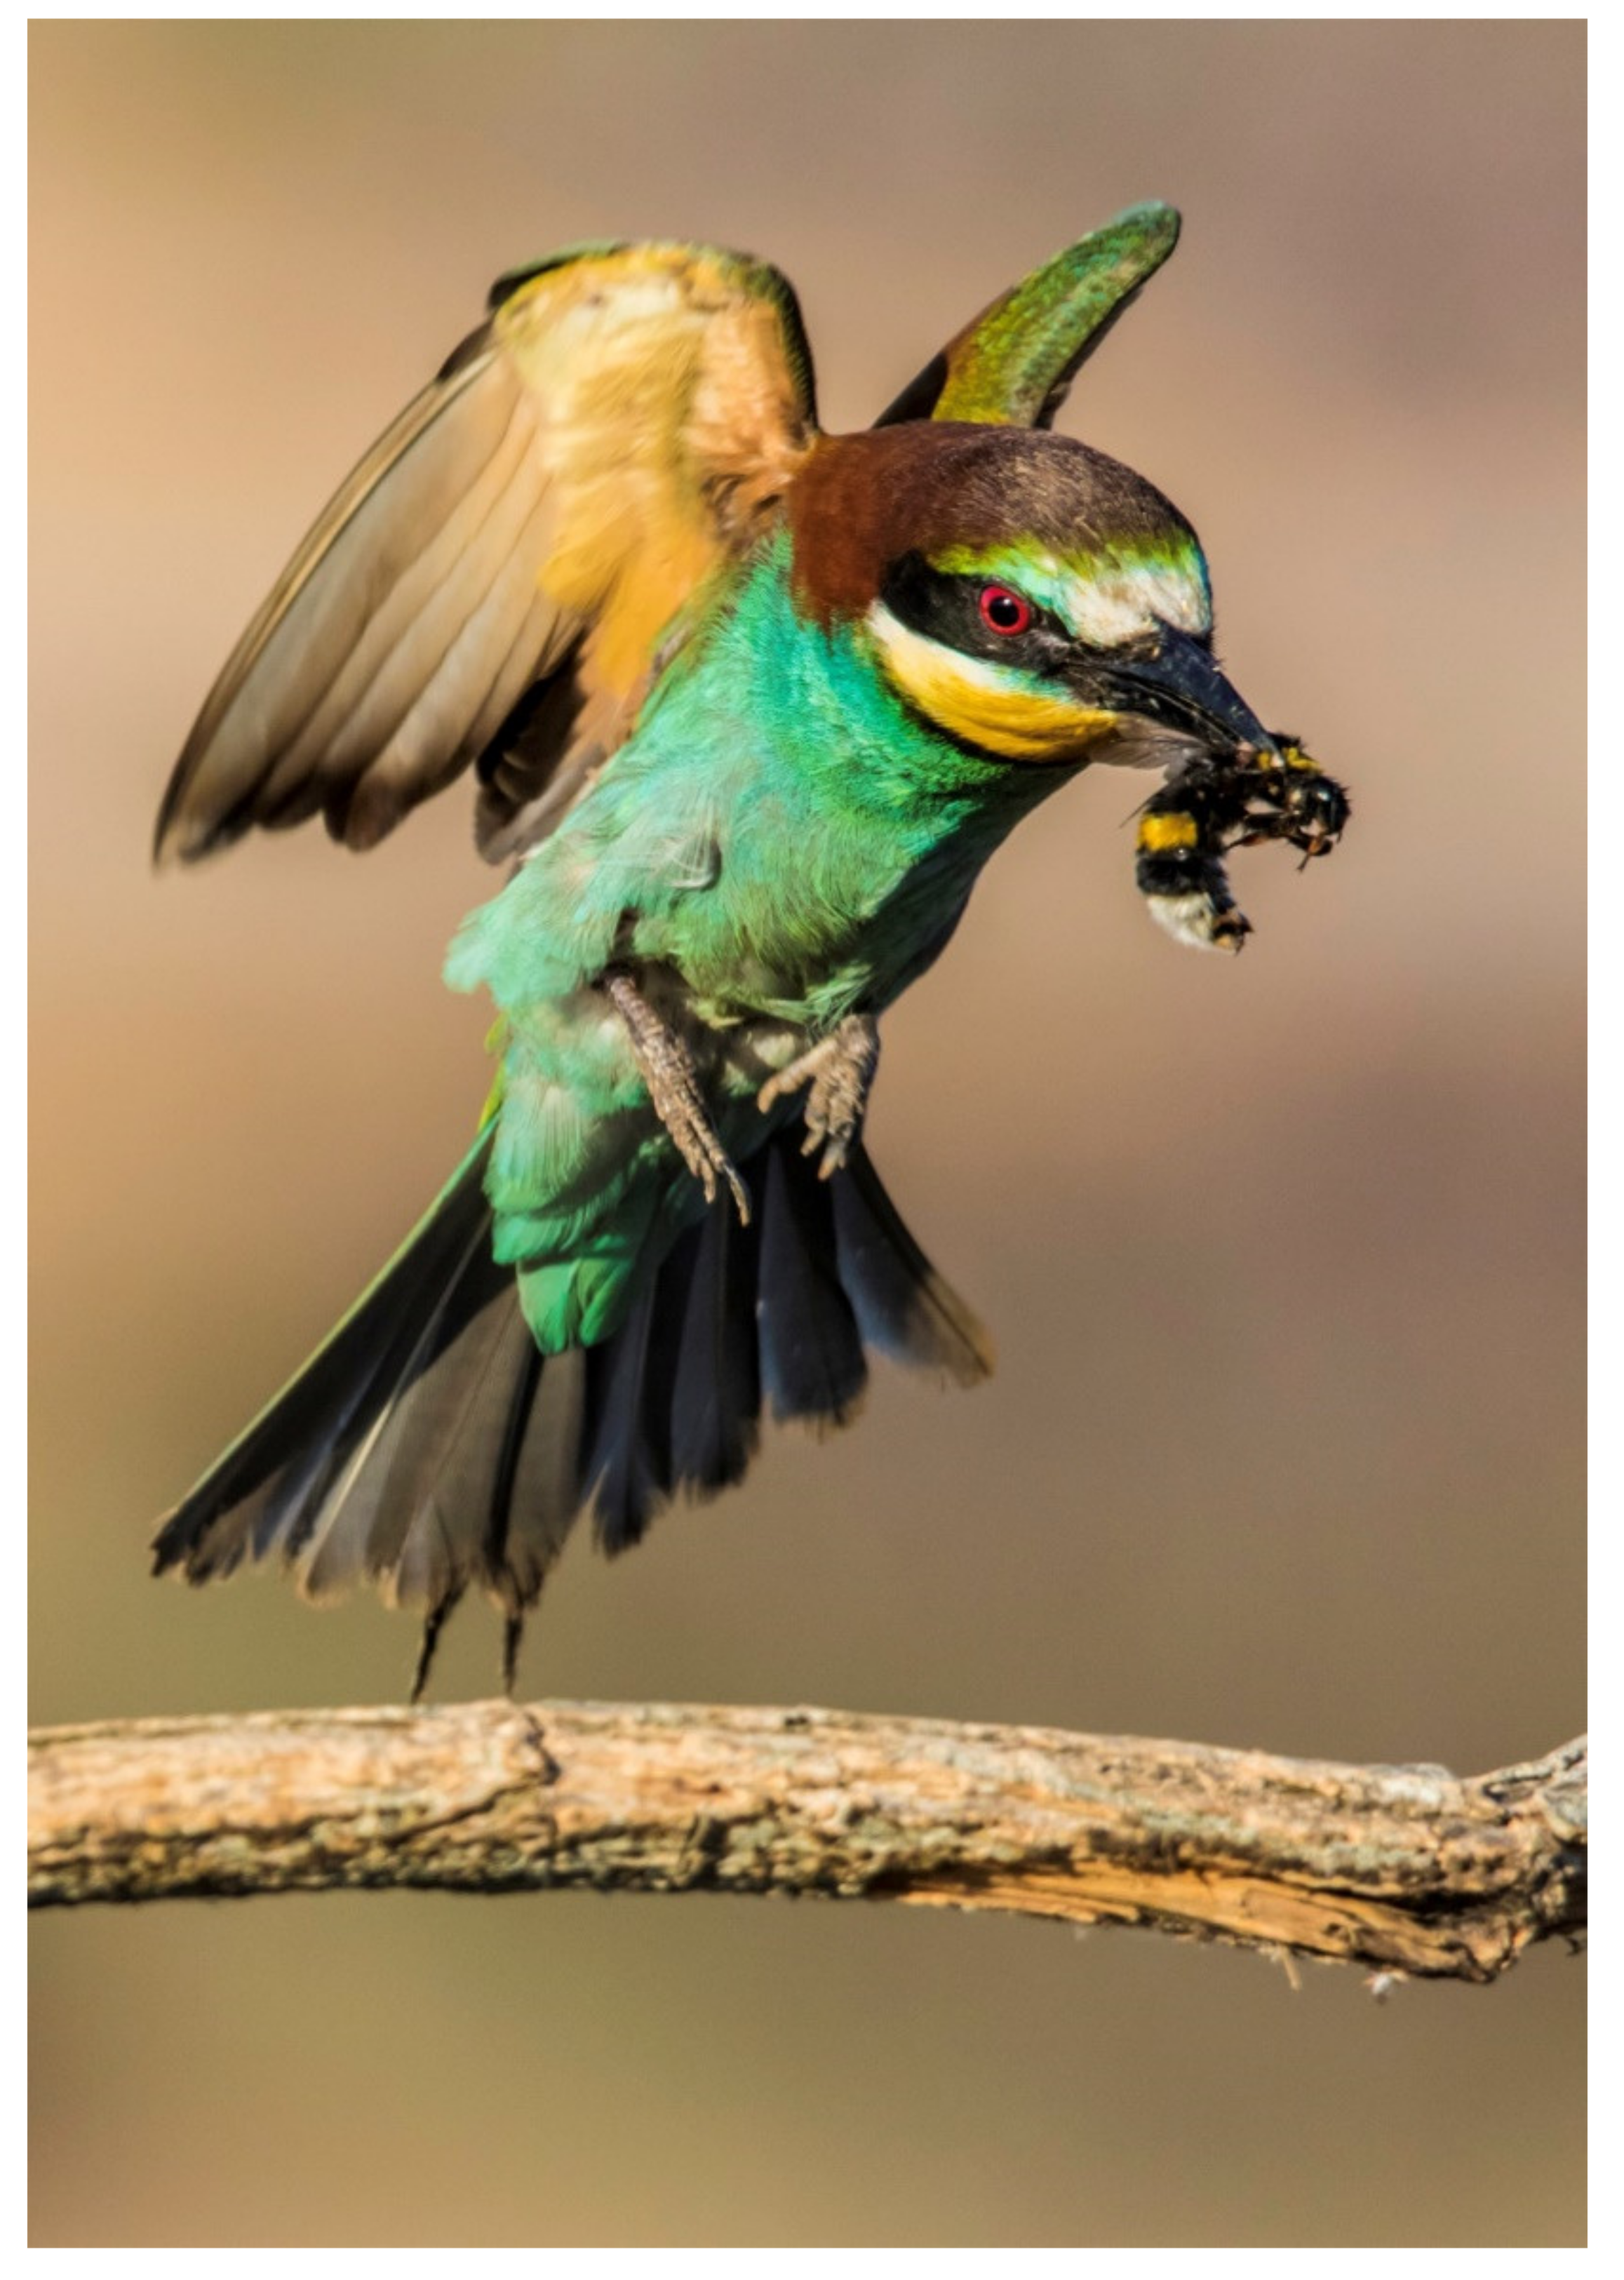 Barbets - Bird of the Month September 2014* - Africa Wild